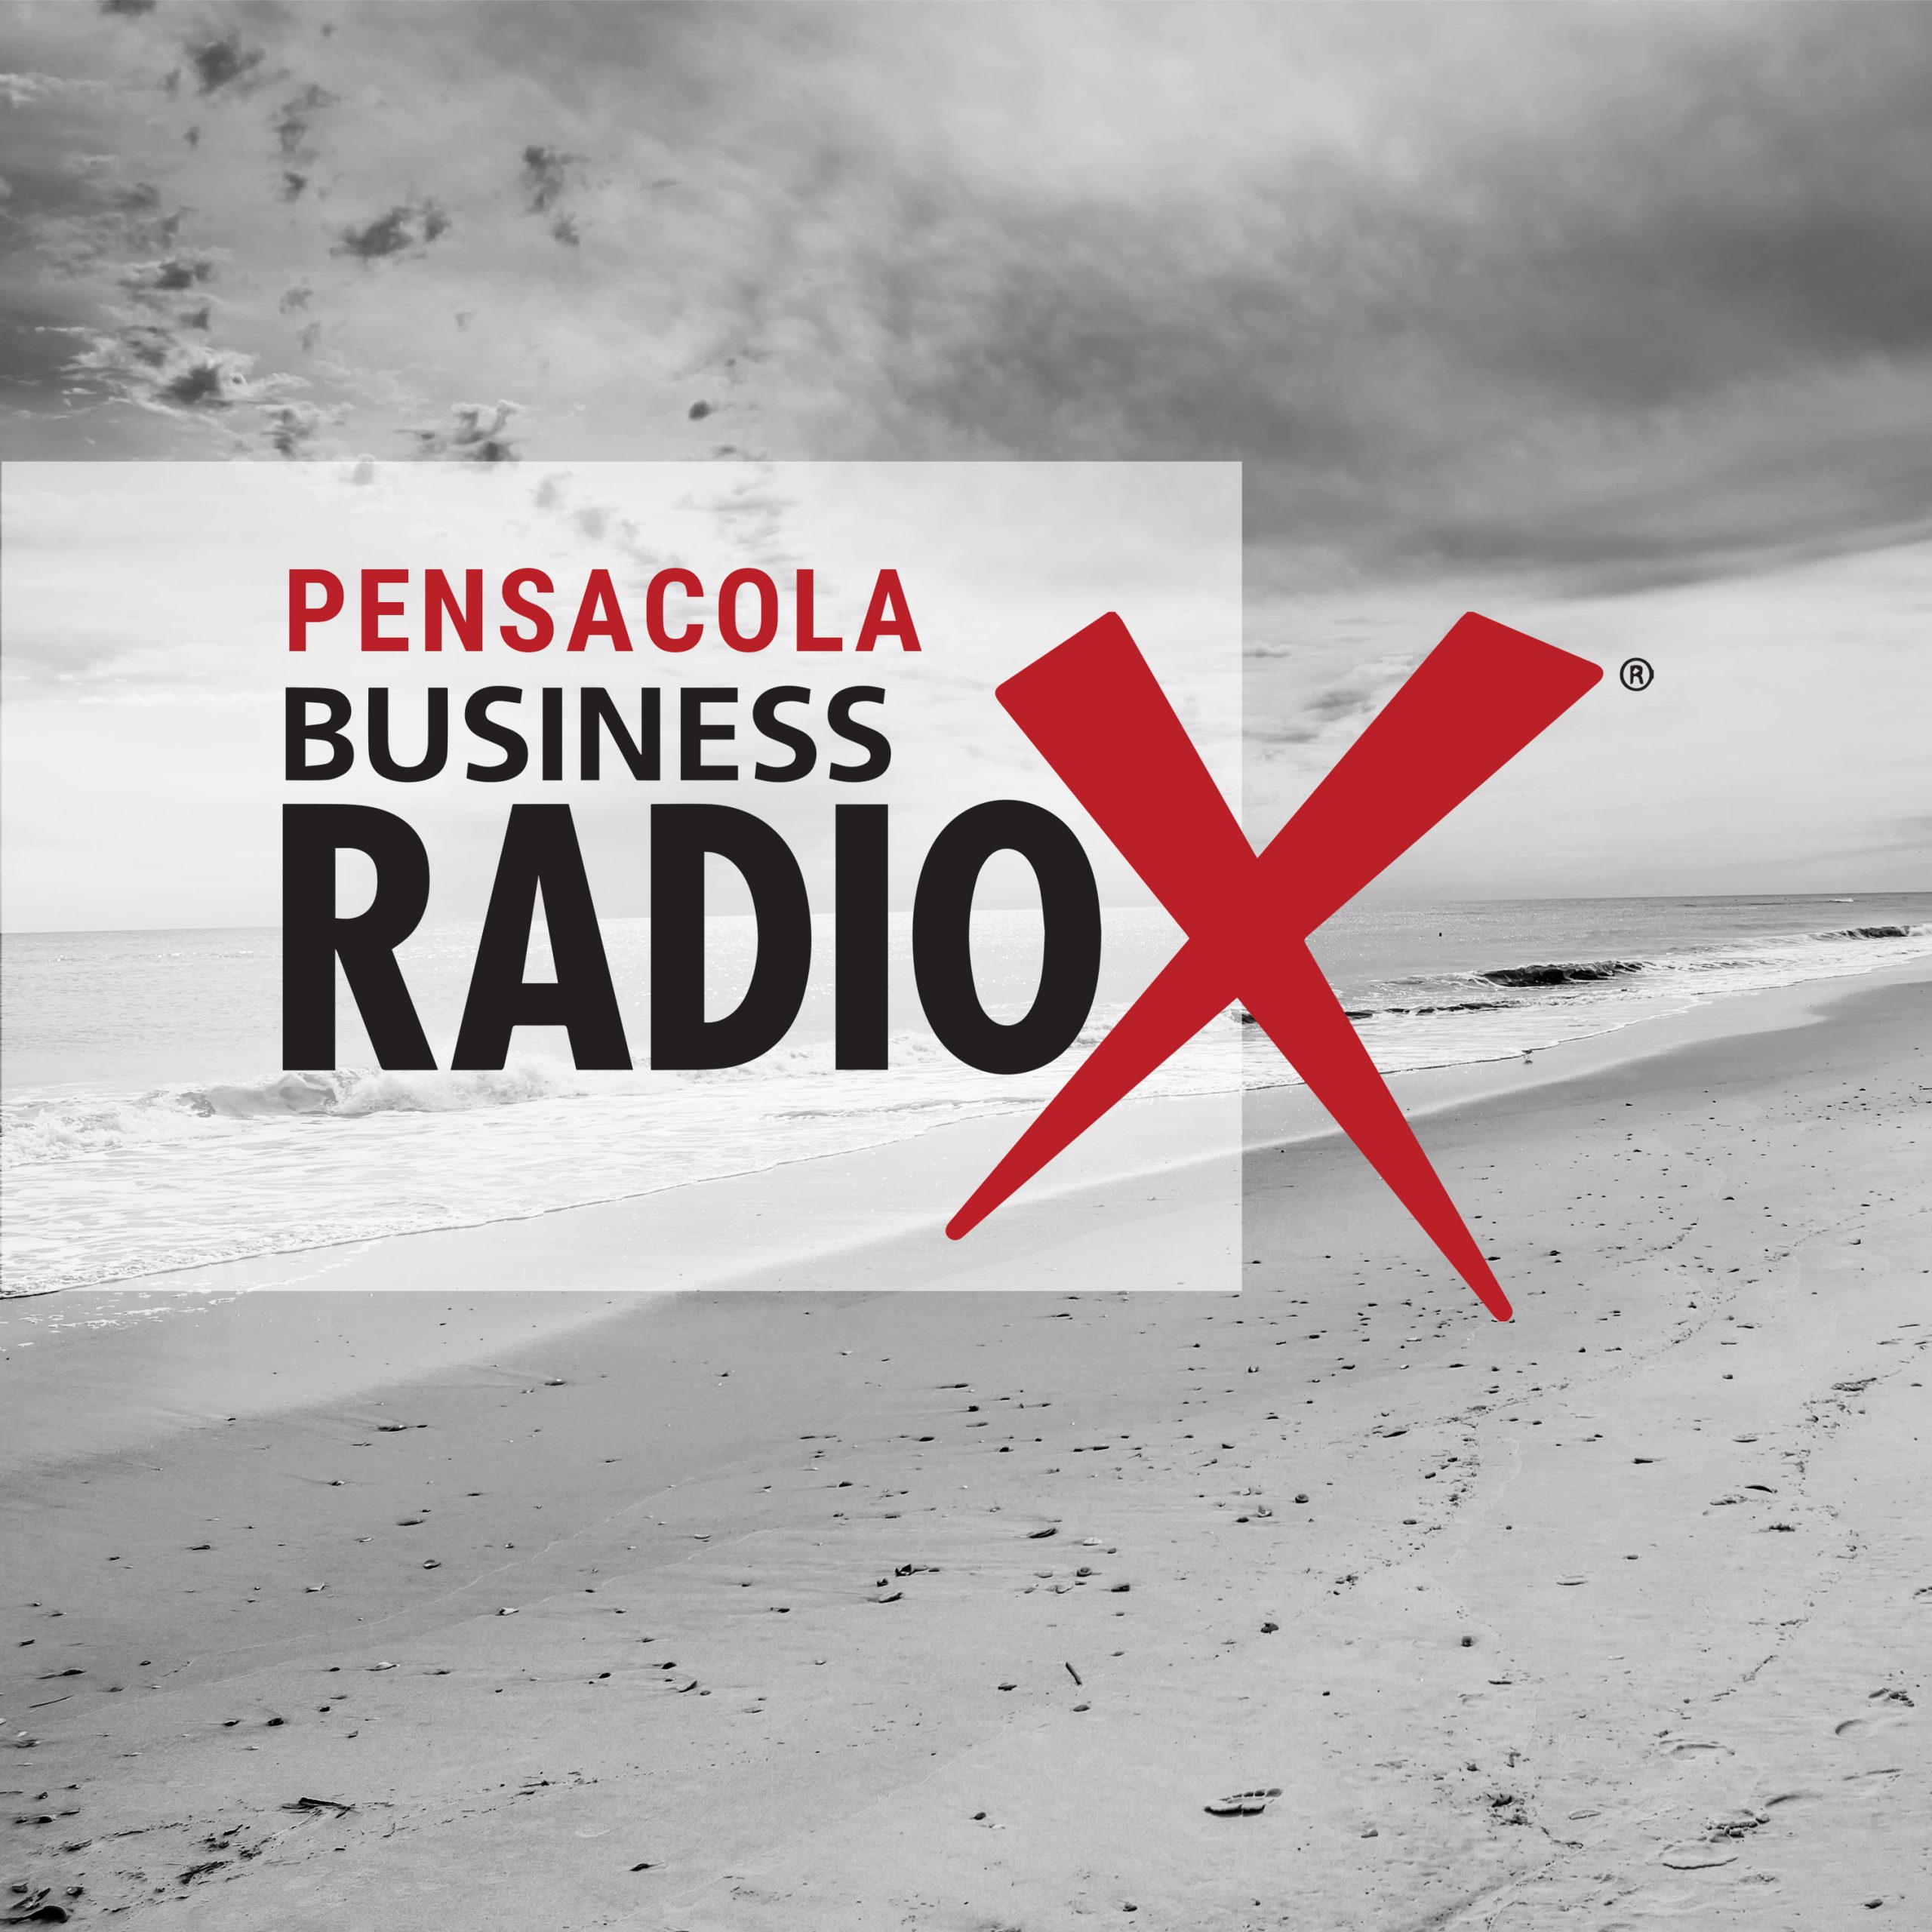 Pensacola Business Radio-05.13.16-Top CEO Series Ep -Sponsored By American Heritage Financial